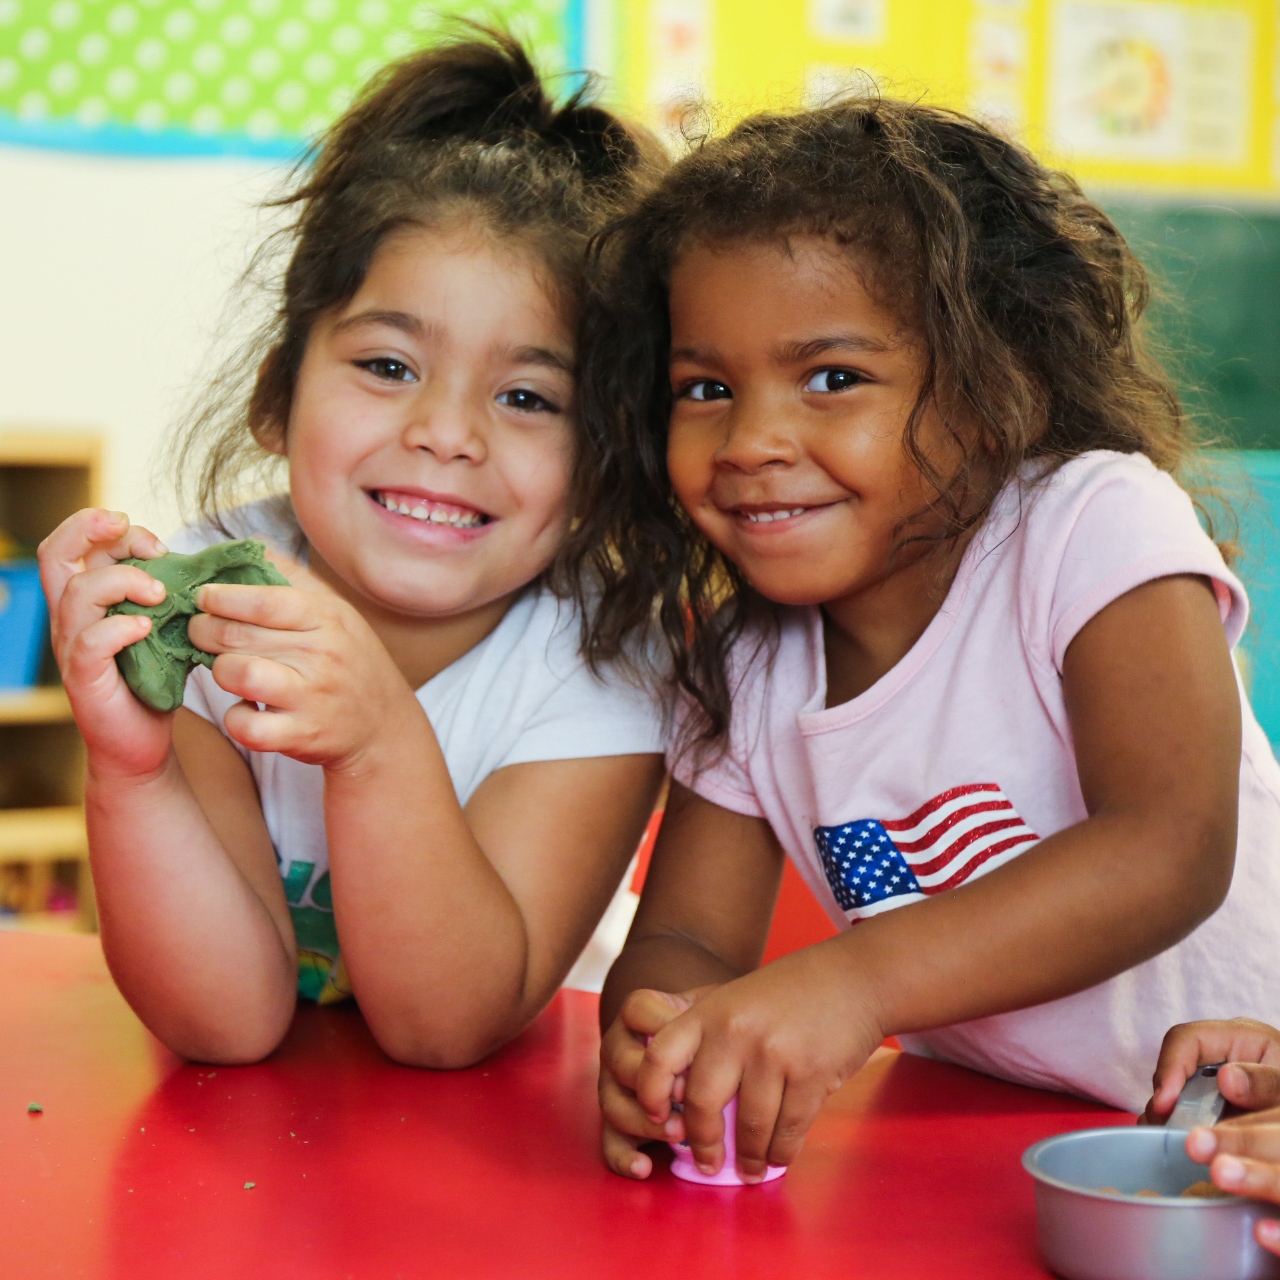  Dezirae, 4, and Harmony, 3, play with play-dough in their child care center in Texas. The center was heavily affected by Hurricane Harvey in August 2017, sustaining structural and interior damage and loss of critical classroom materials and equipment. In the aftermath of the catastrophic storm, funds, books and toys from Save the Children have helped restore and improve the child care center, and the children’s day-to-day experiences. Save the Children also replaced the center’s restroom and the counters in the kitchen. Photo by Ellery Lamm for Save the Children.